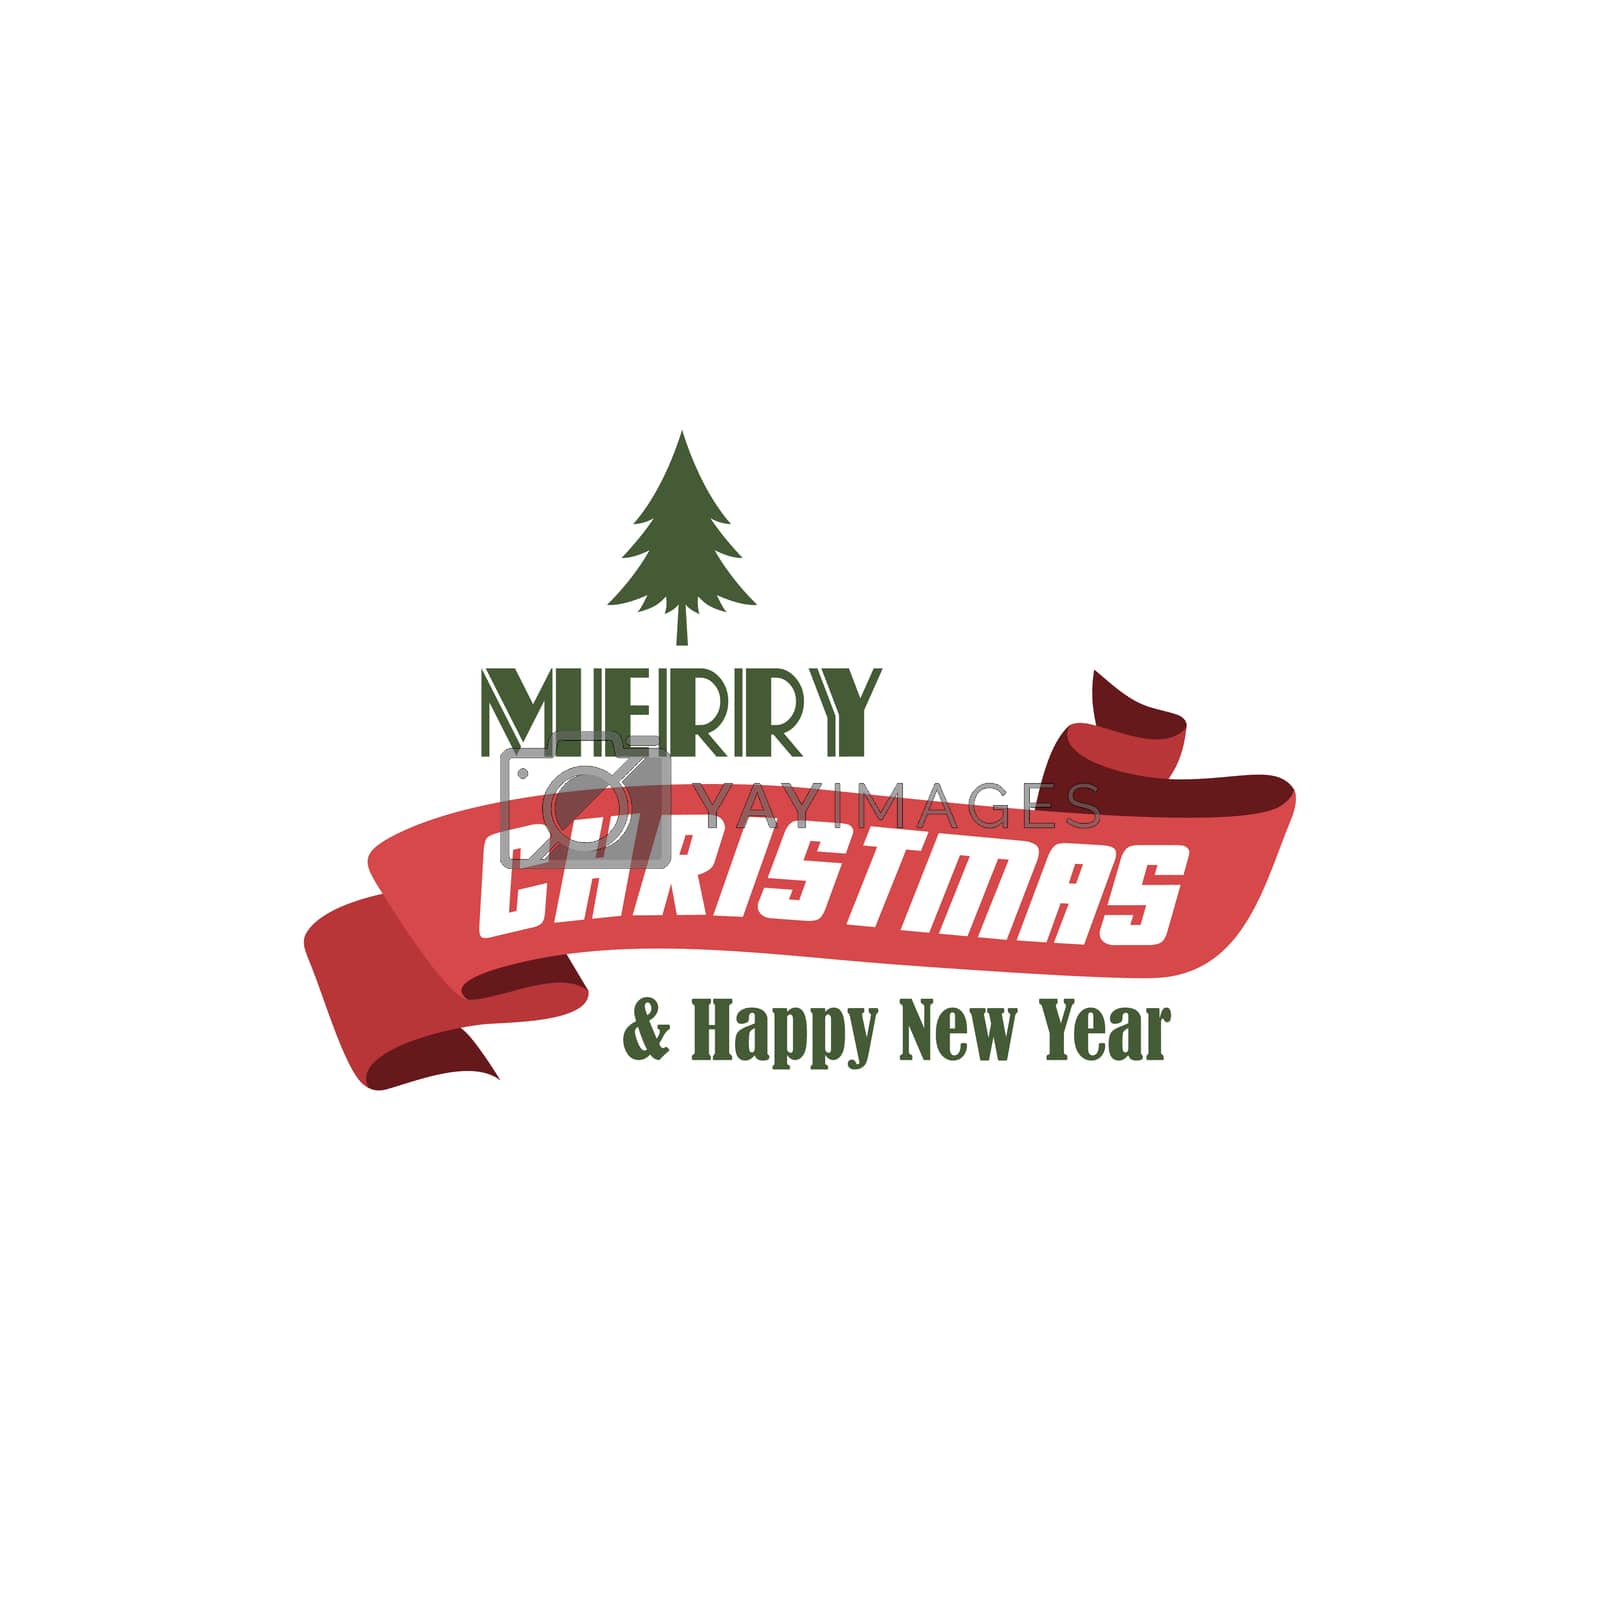 Royalty free image of merry christmas label by vector1st